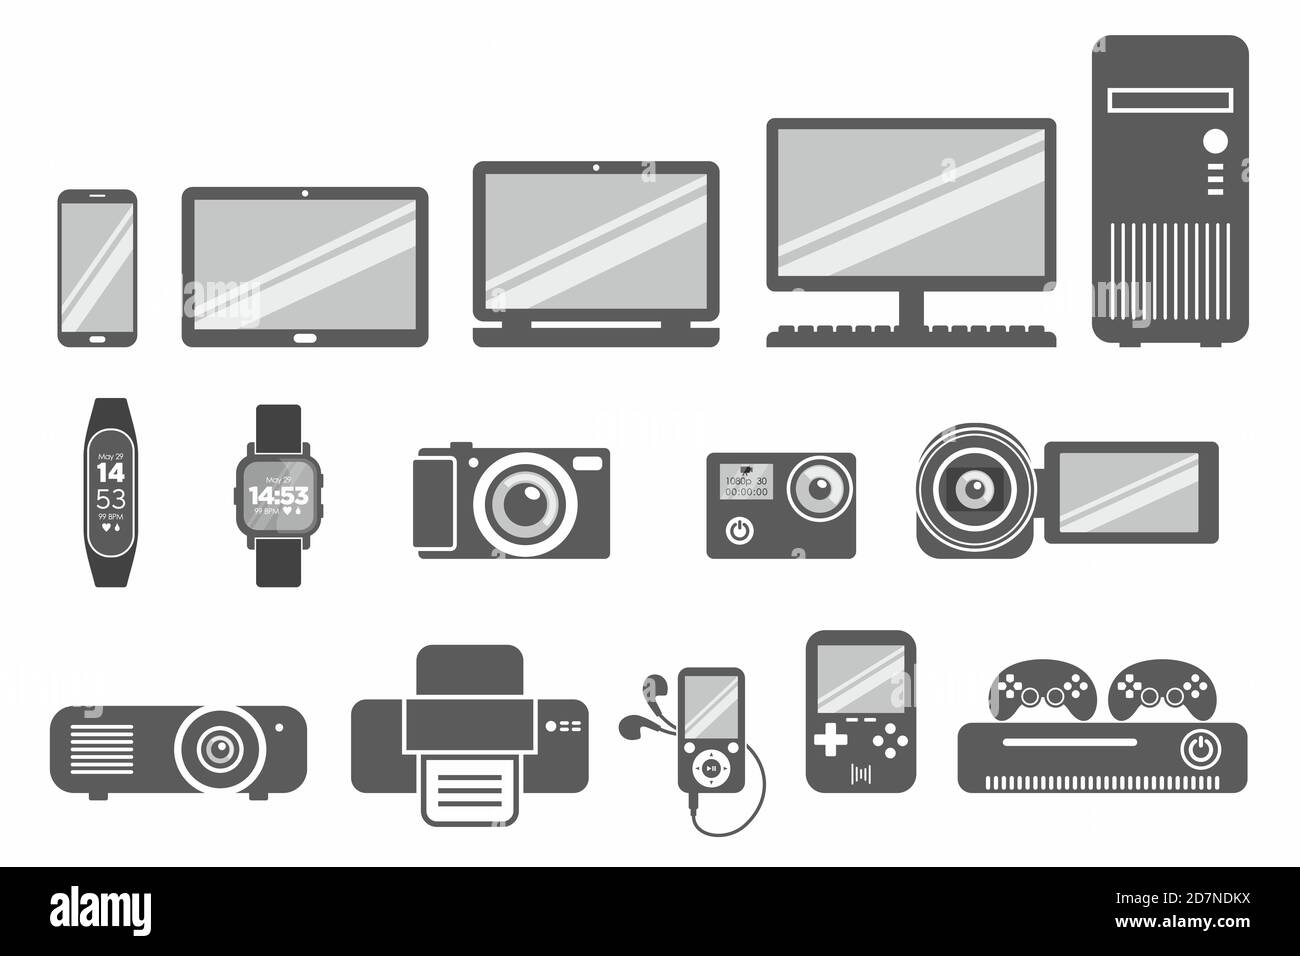 Technology products flat icon visual pack. Modern illustration in shades of gray. Stock Vector